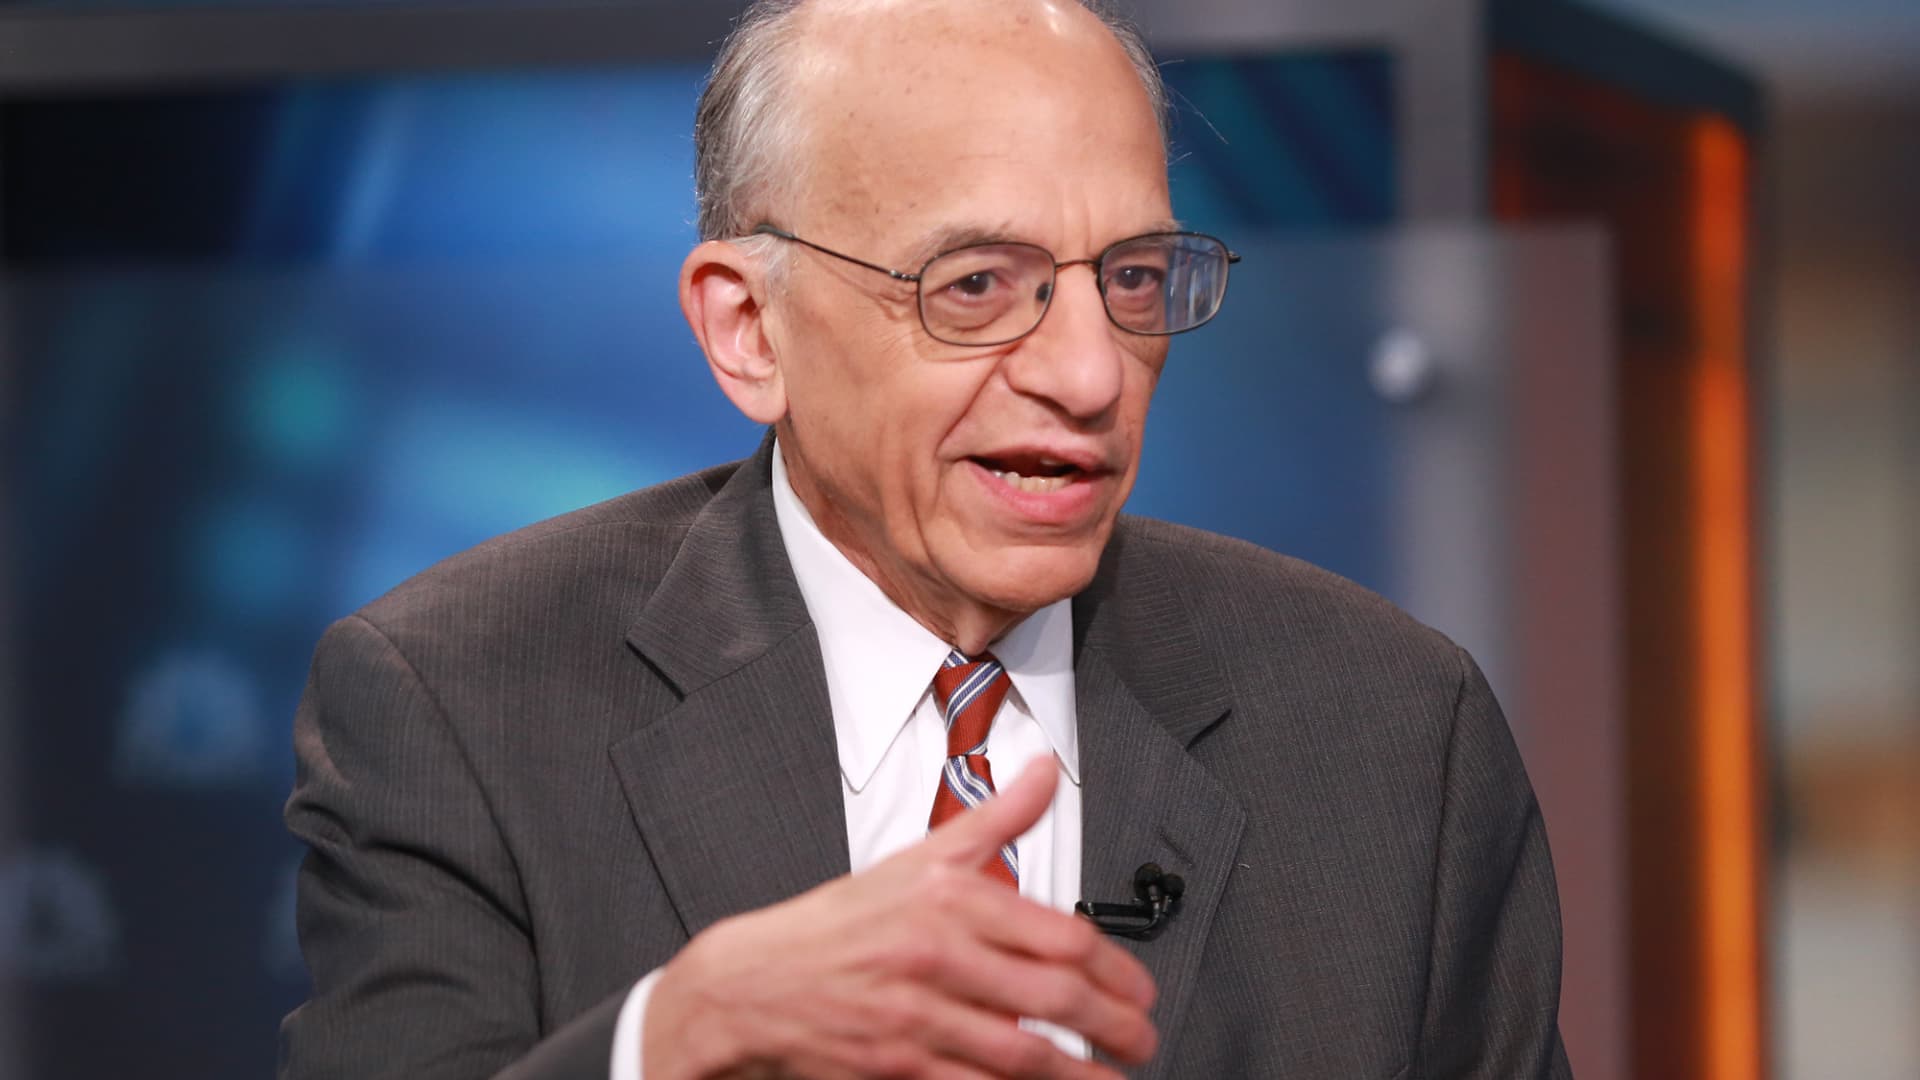 Jeremy Siegel says 100 basis point rate hike is ‘medicine to stop this inflation’